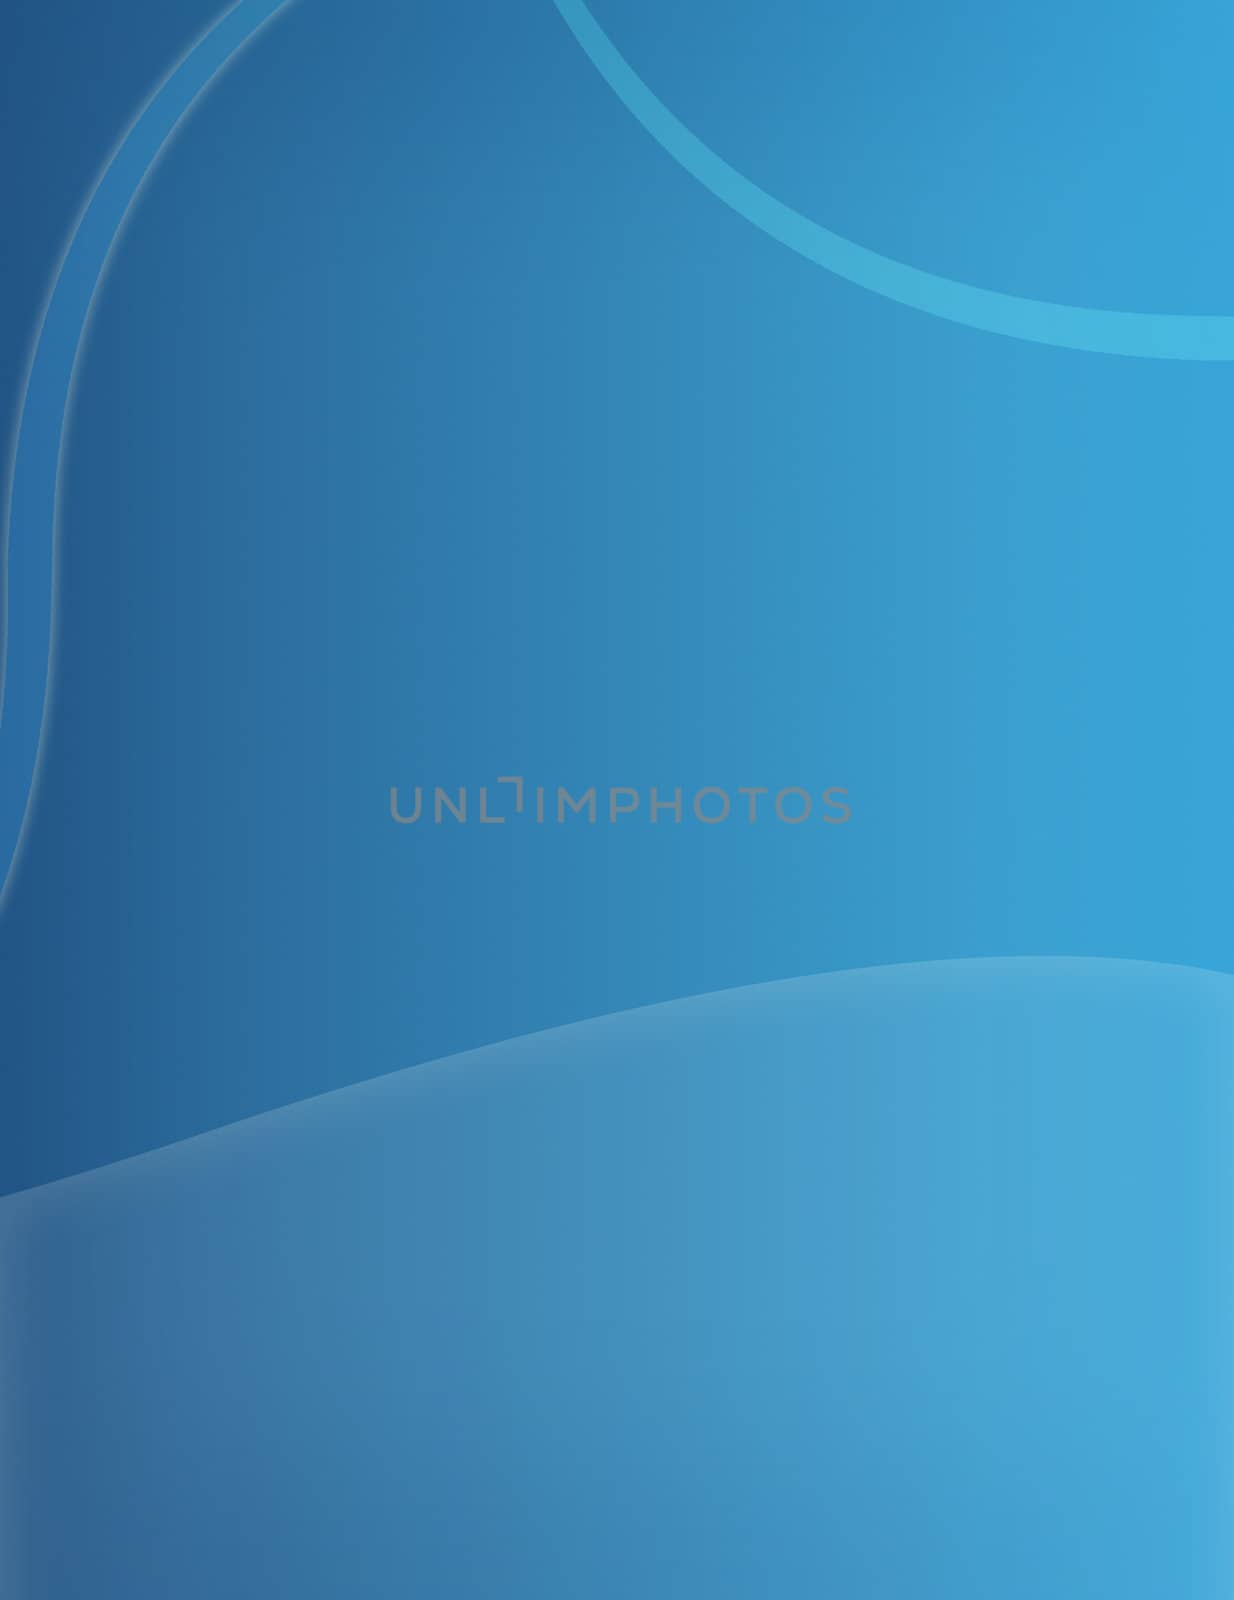 Computer designed blue abstract style background